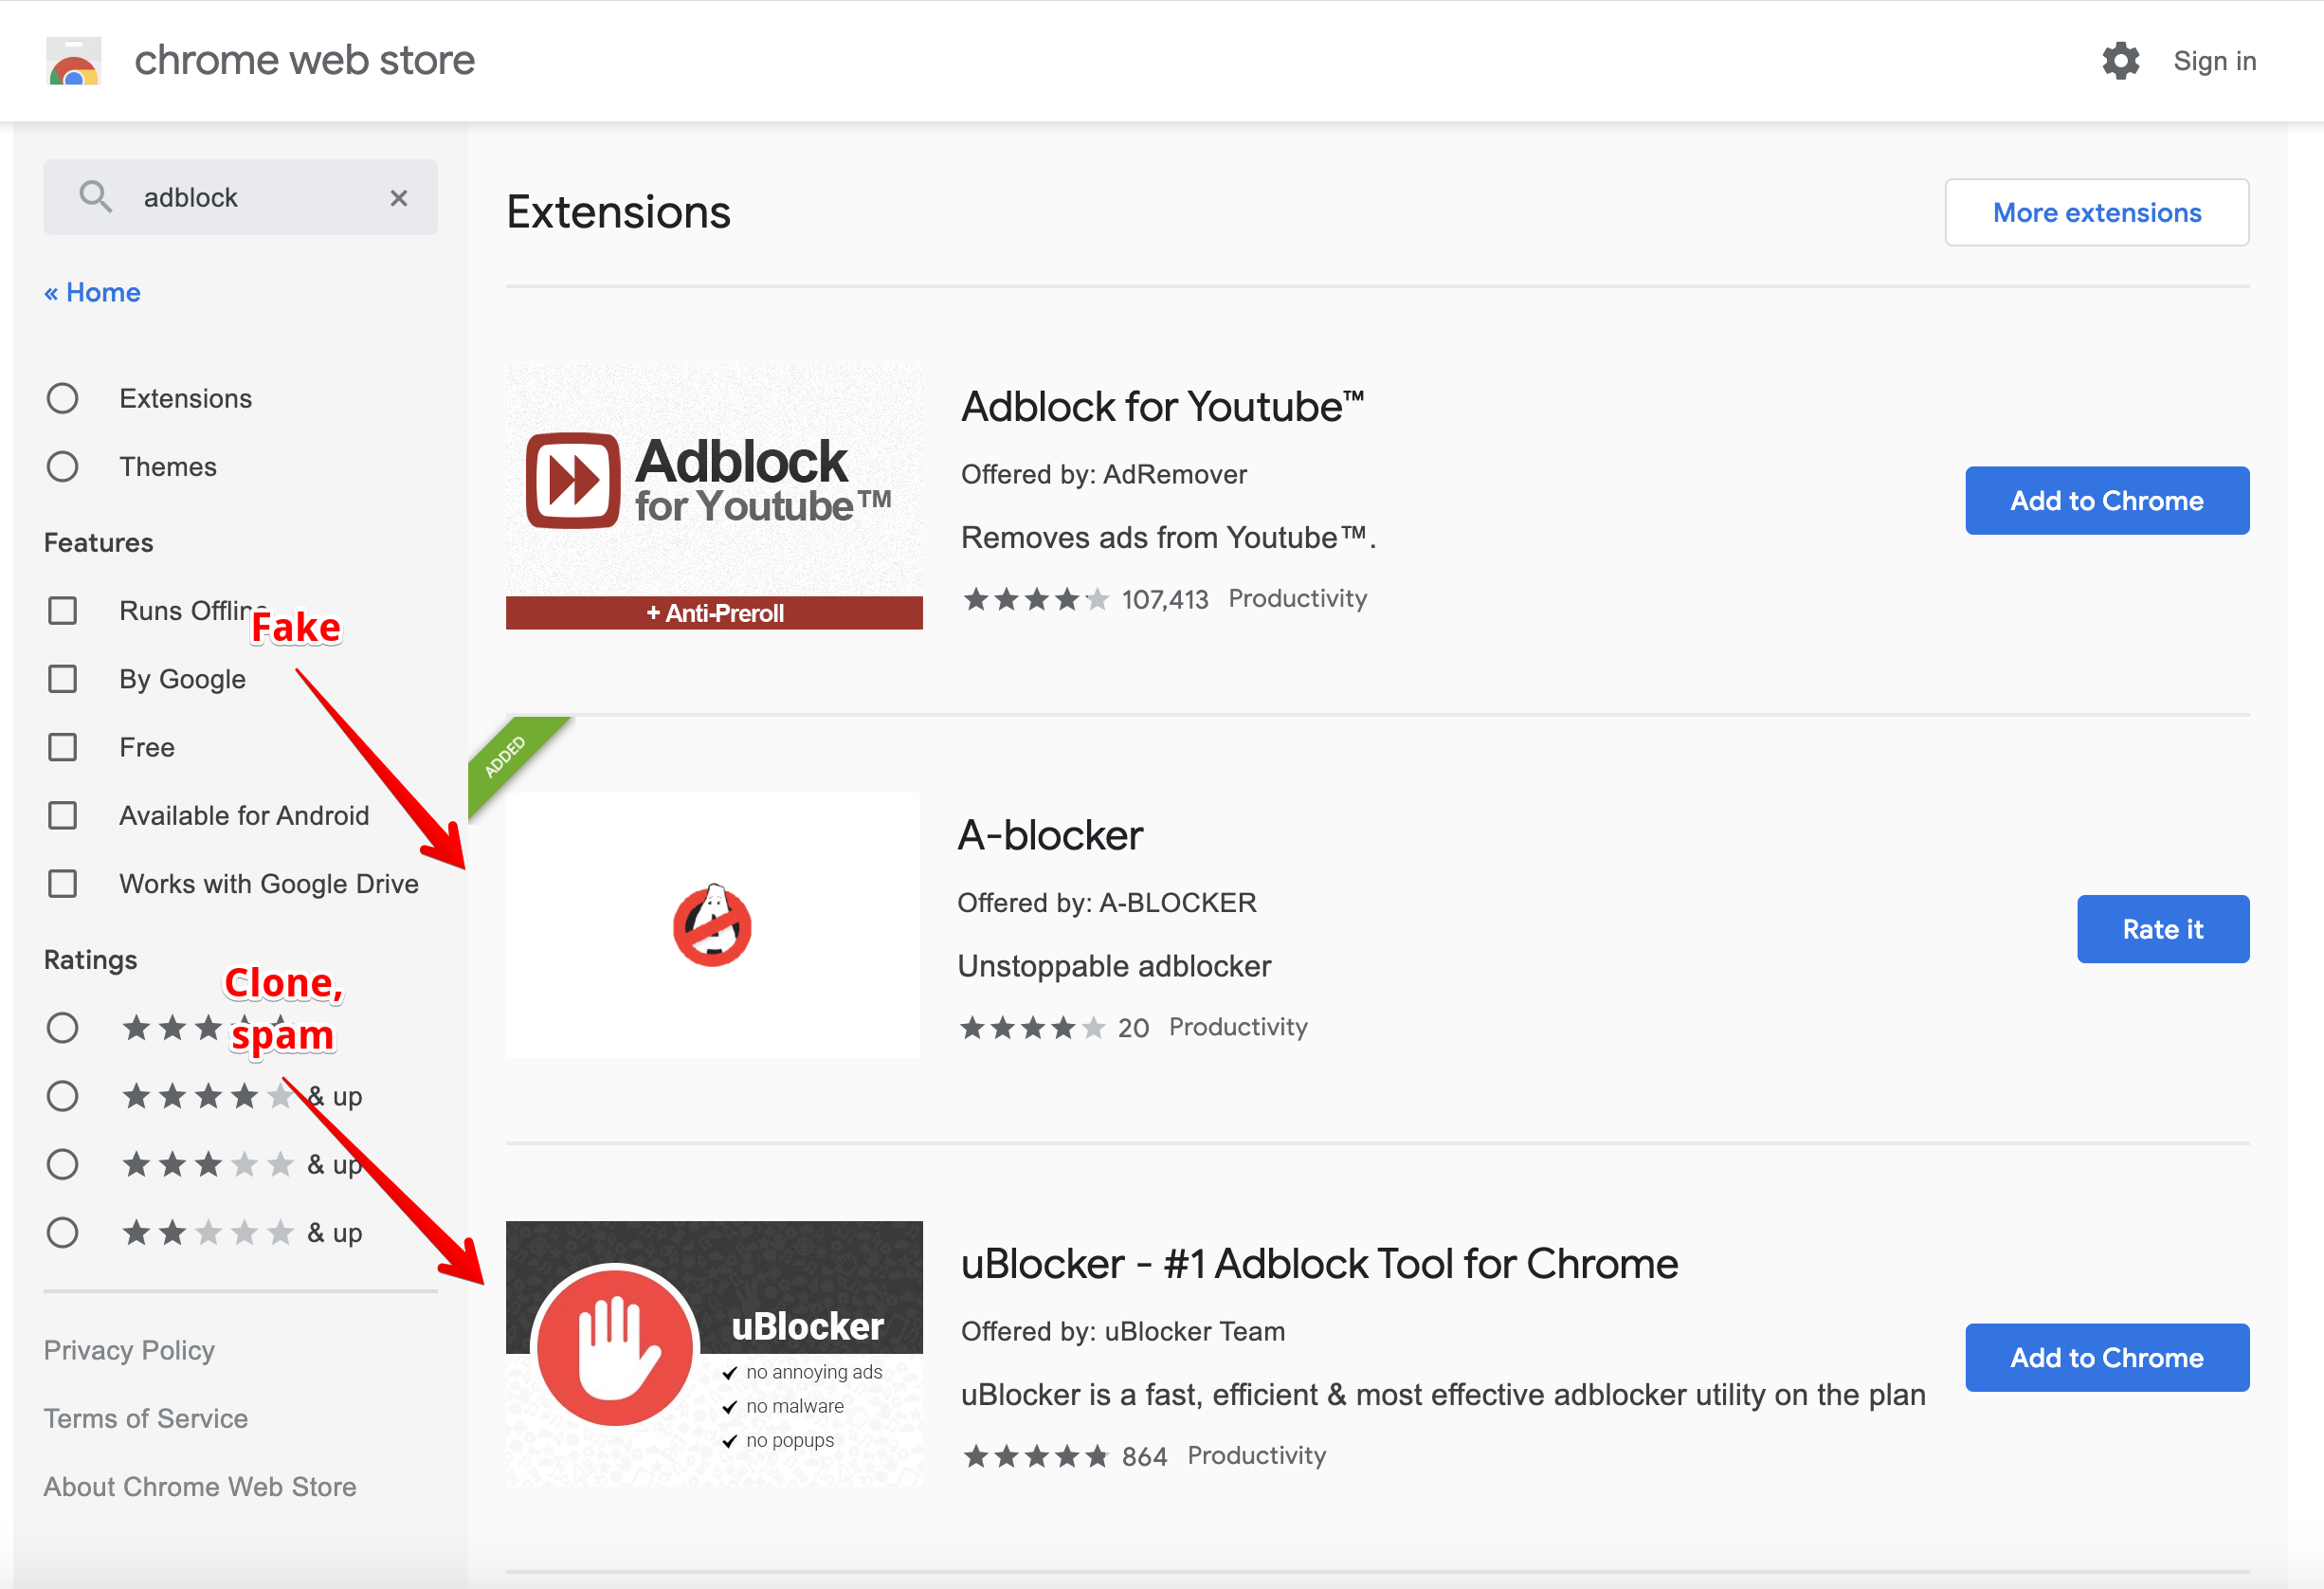 this extension violates the chrome web store policy.